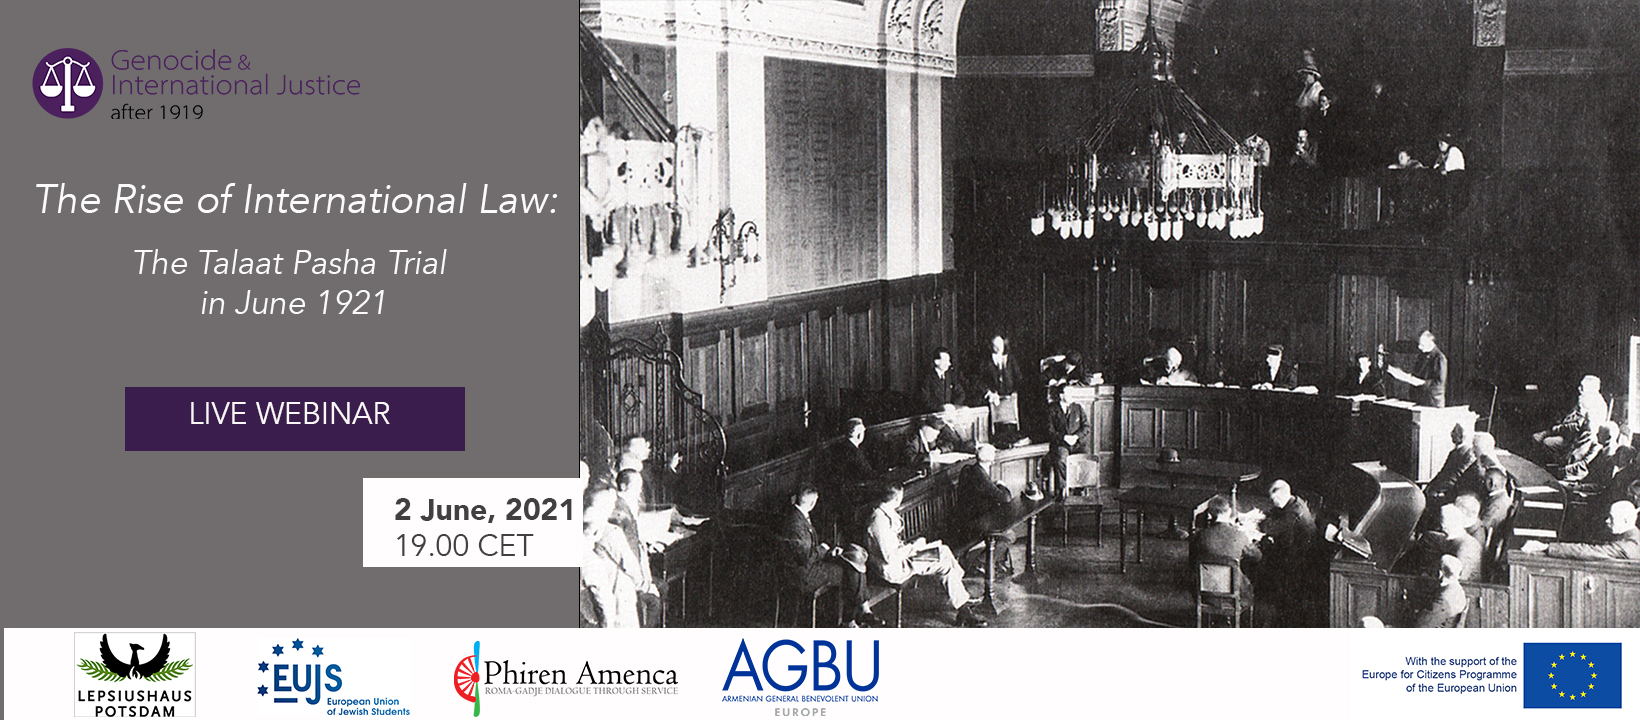 The Rise of International Law: The Talaat Pasha Trial in June 1921 – Live Webinar